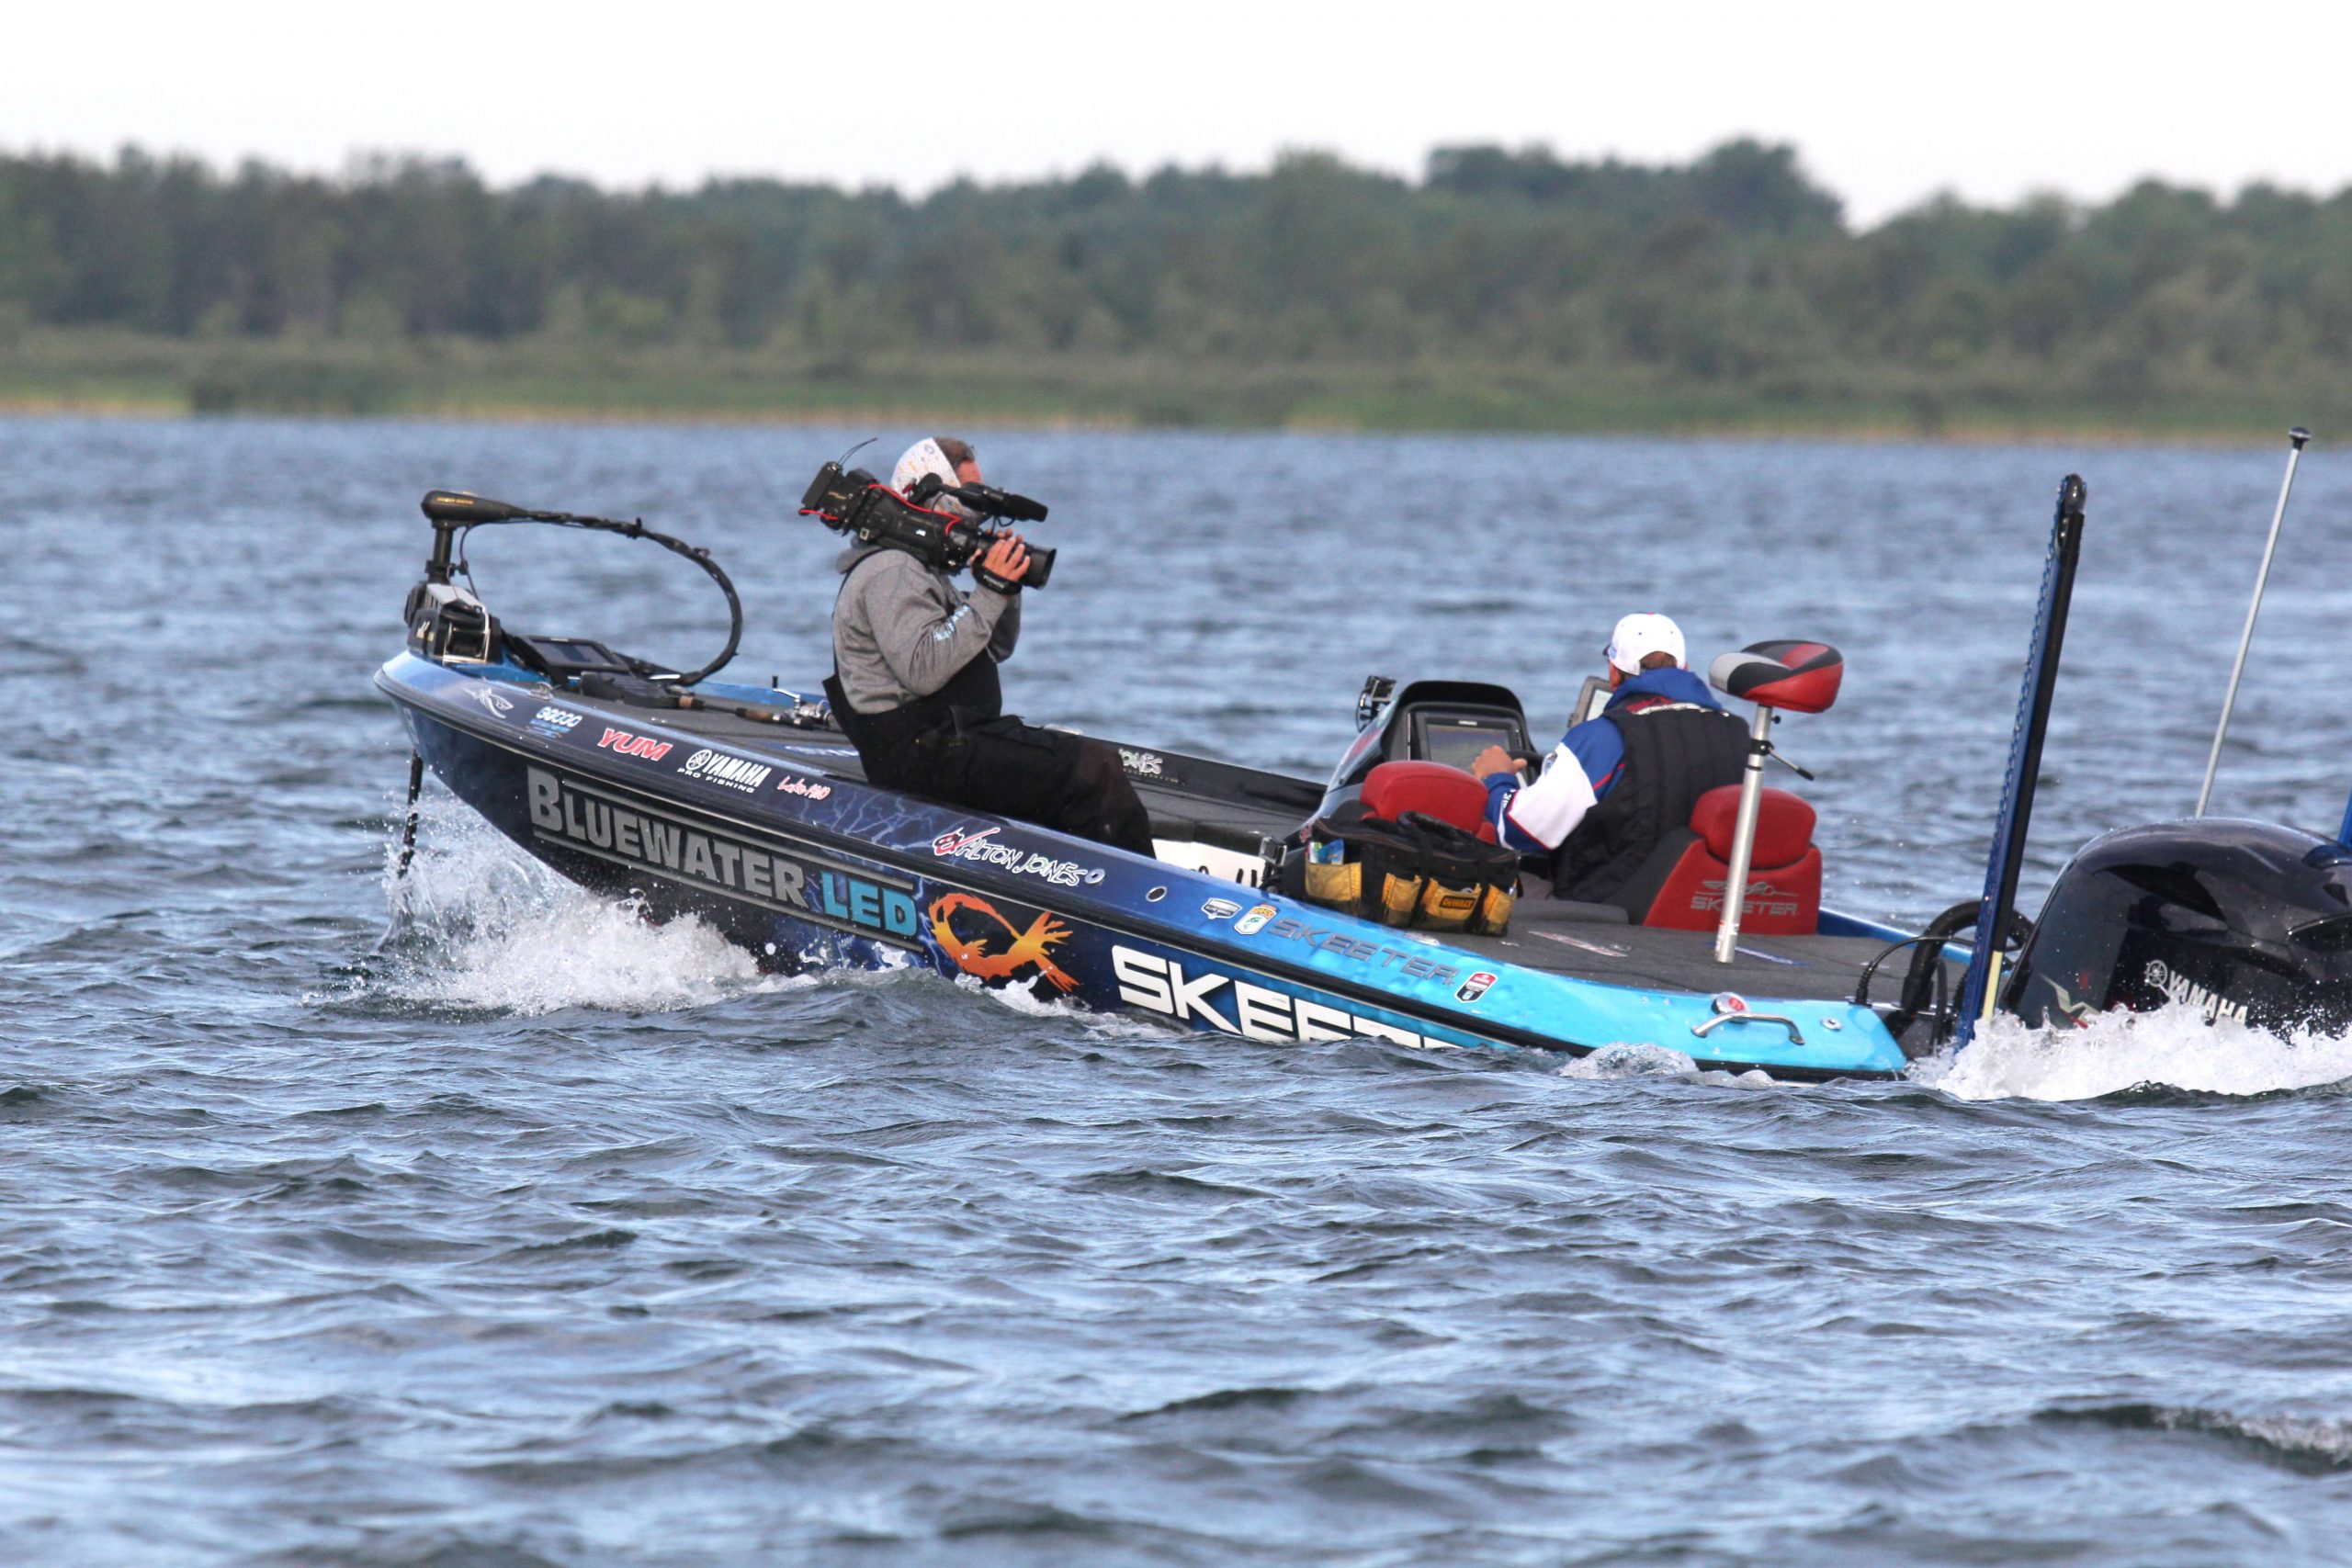 Head out on the St Lawrence River with Alton Jones as he tries to chase down the crown at the Evan Williams Bourbon Bassmaster Elite.